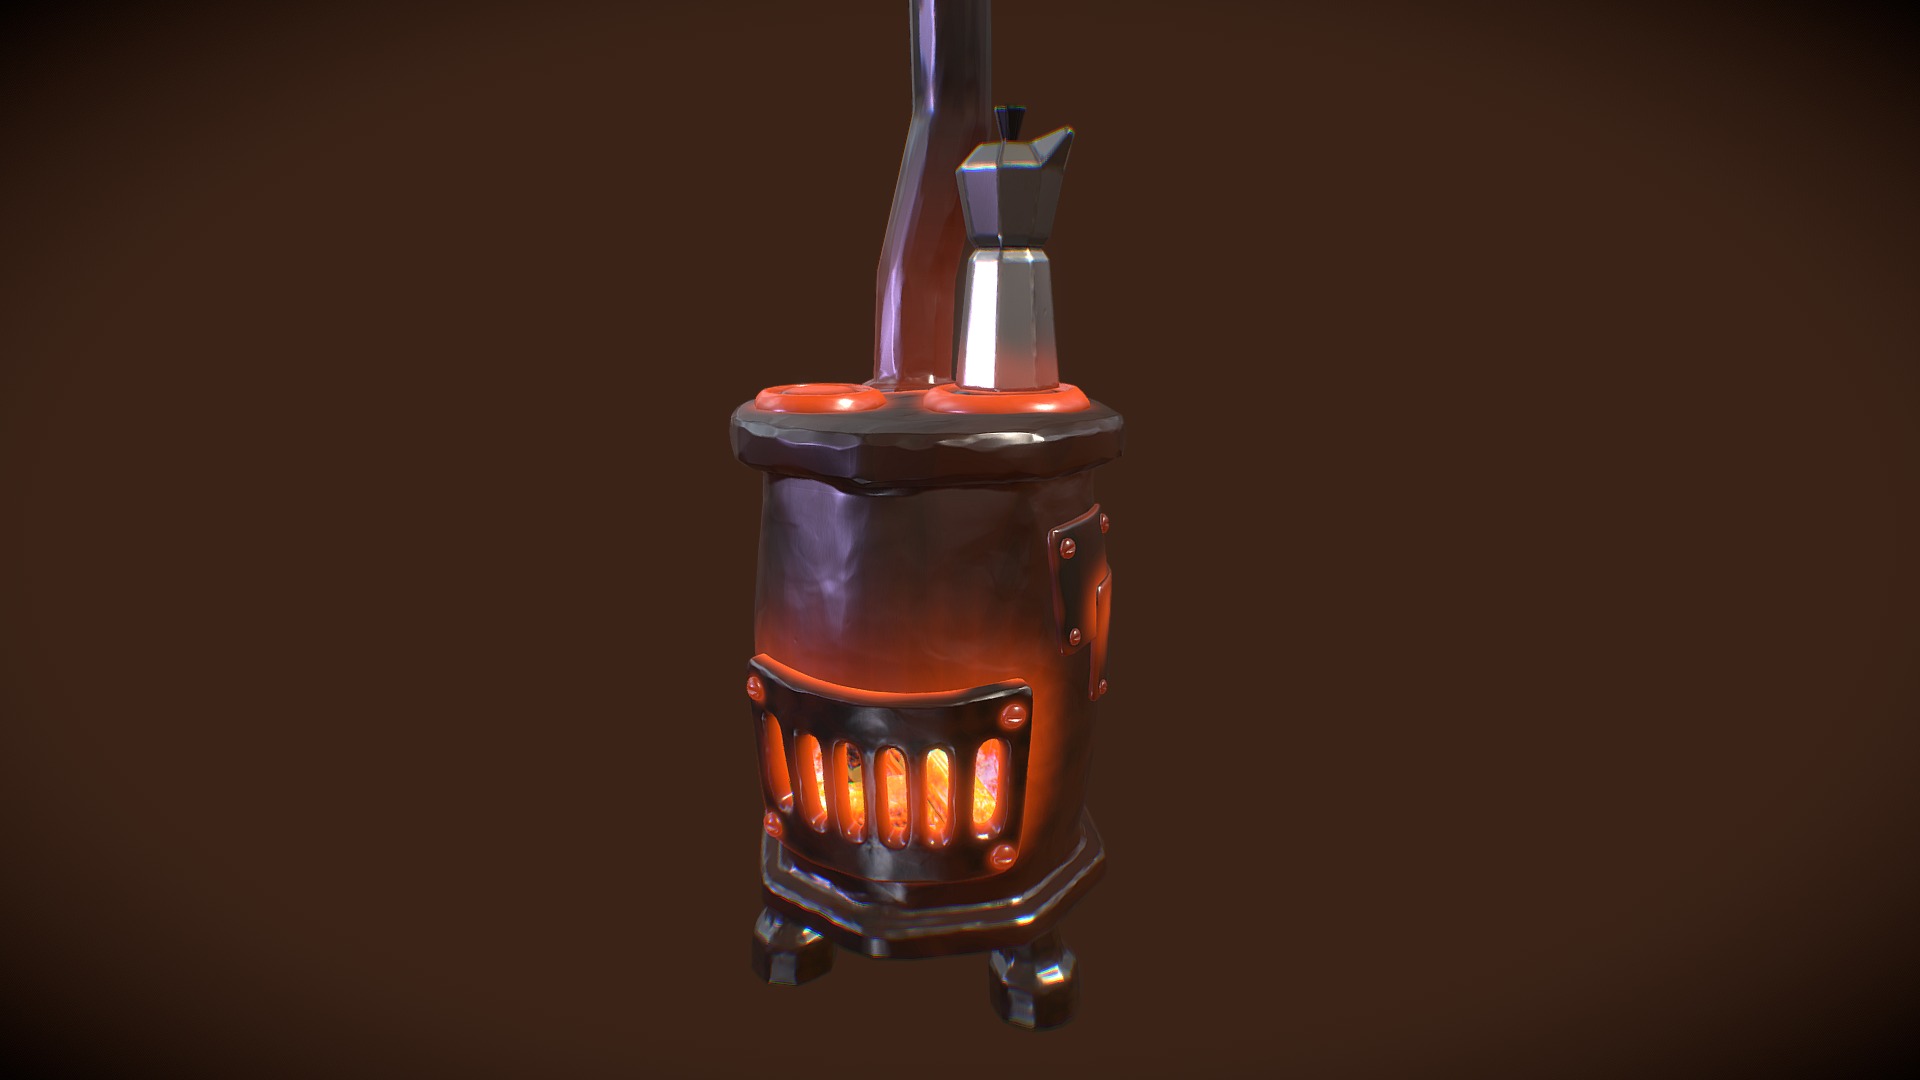 3D model #3December #Day2 Grandma’s stove - This is a 3D model of the #3December #Day2 Grandma's stove. The 3D model is about a light bulb with a red light.